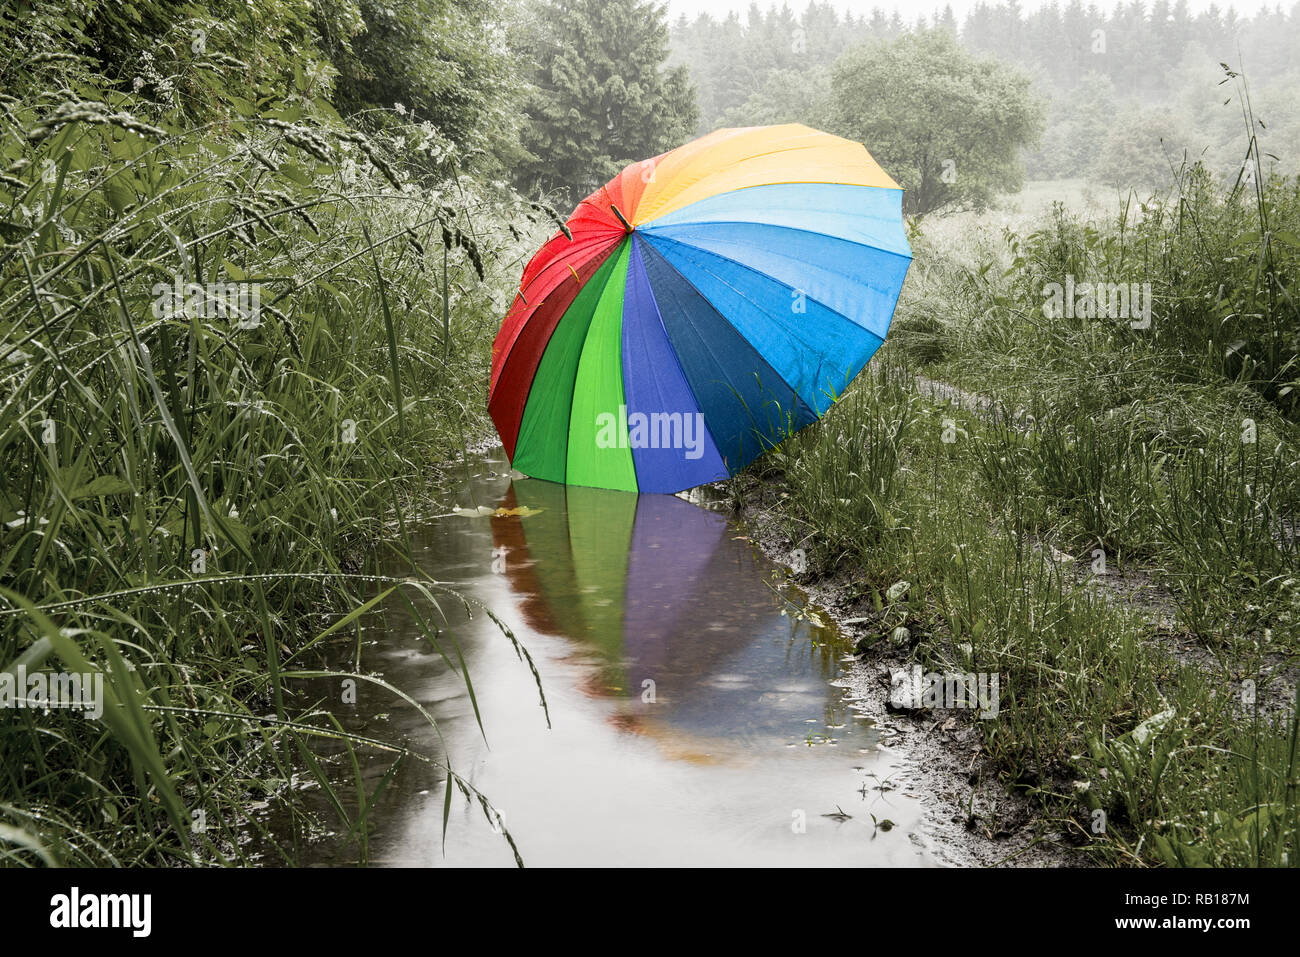 lonely big colored umbrella in the landscape and reflecting in water Stock Photo